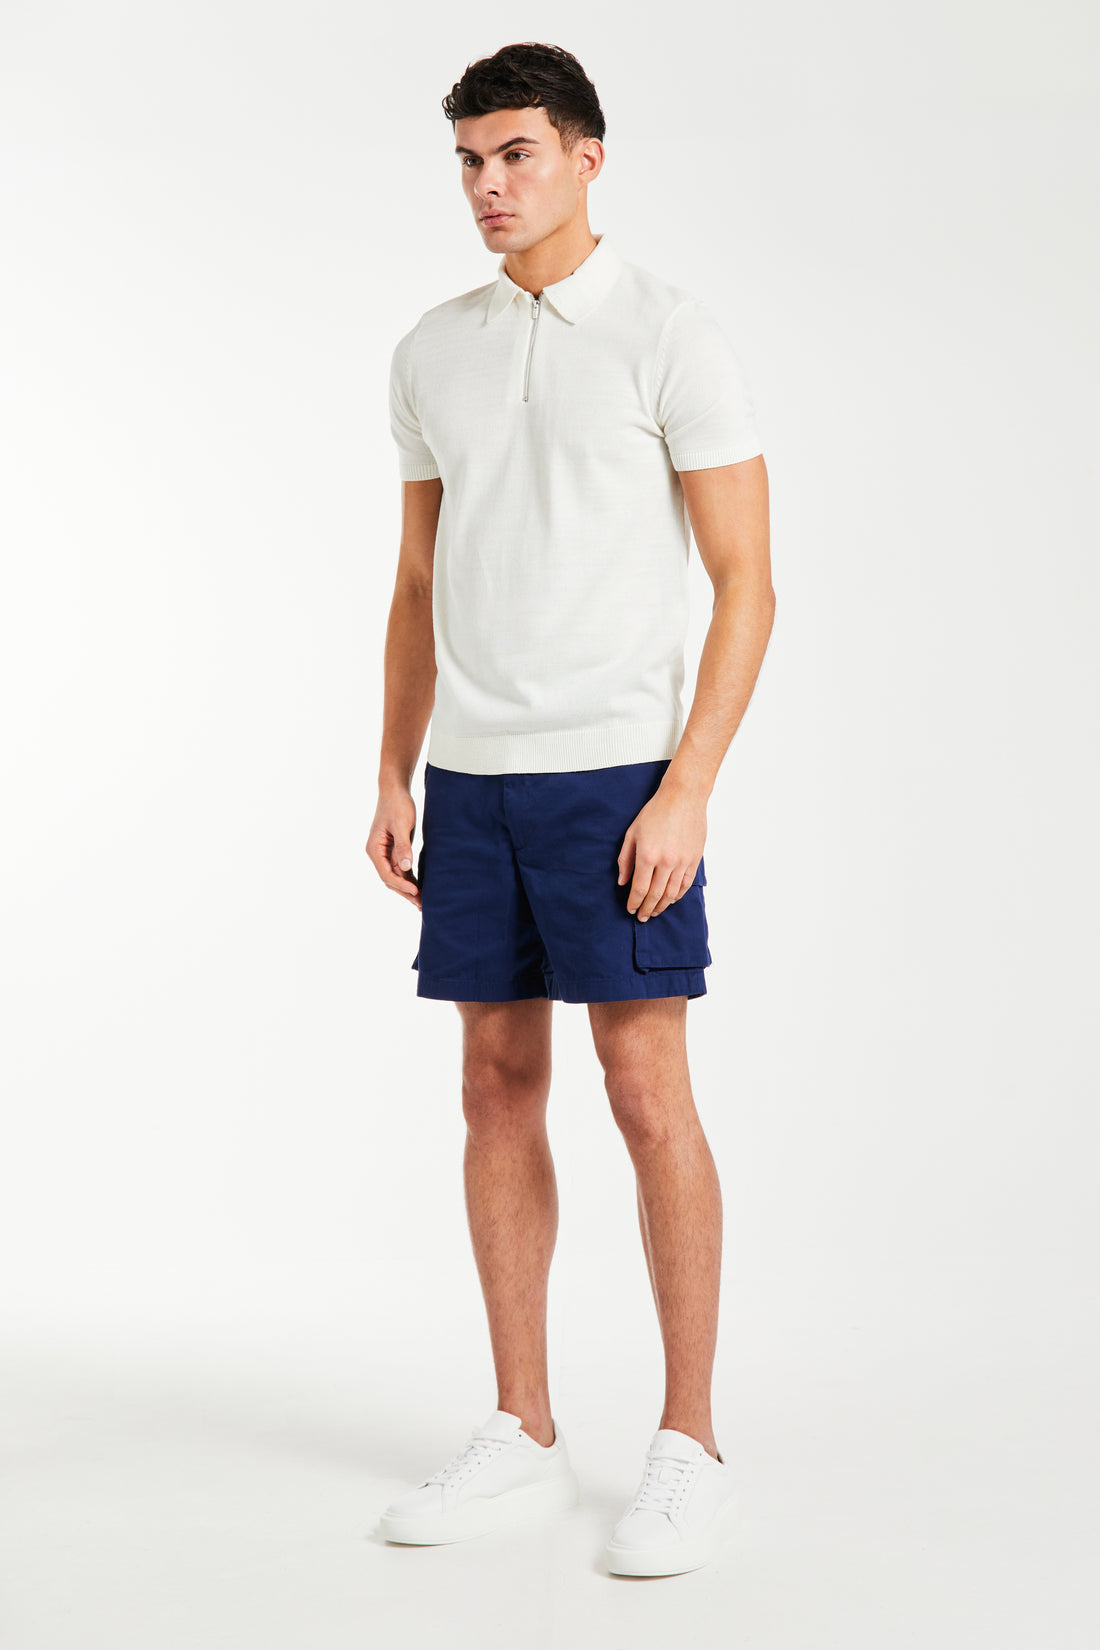 men's knitwear polo in cream styled on male model with shorts